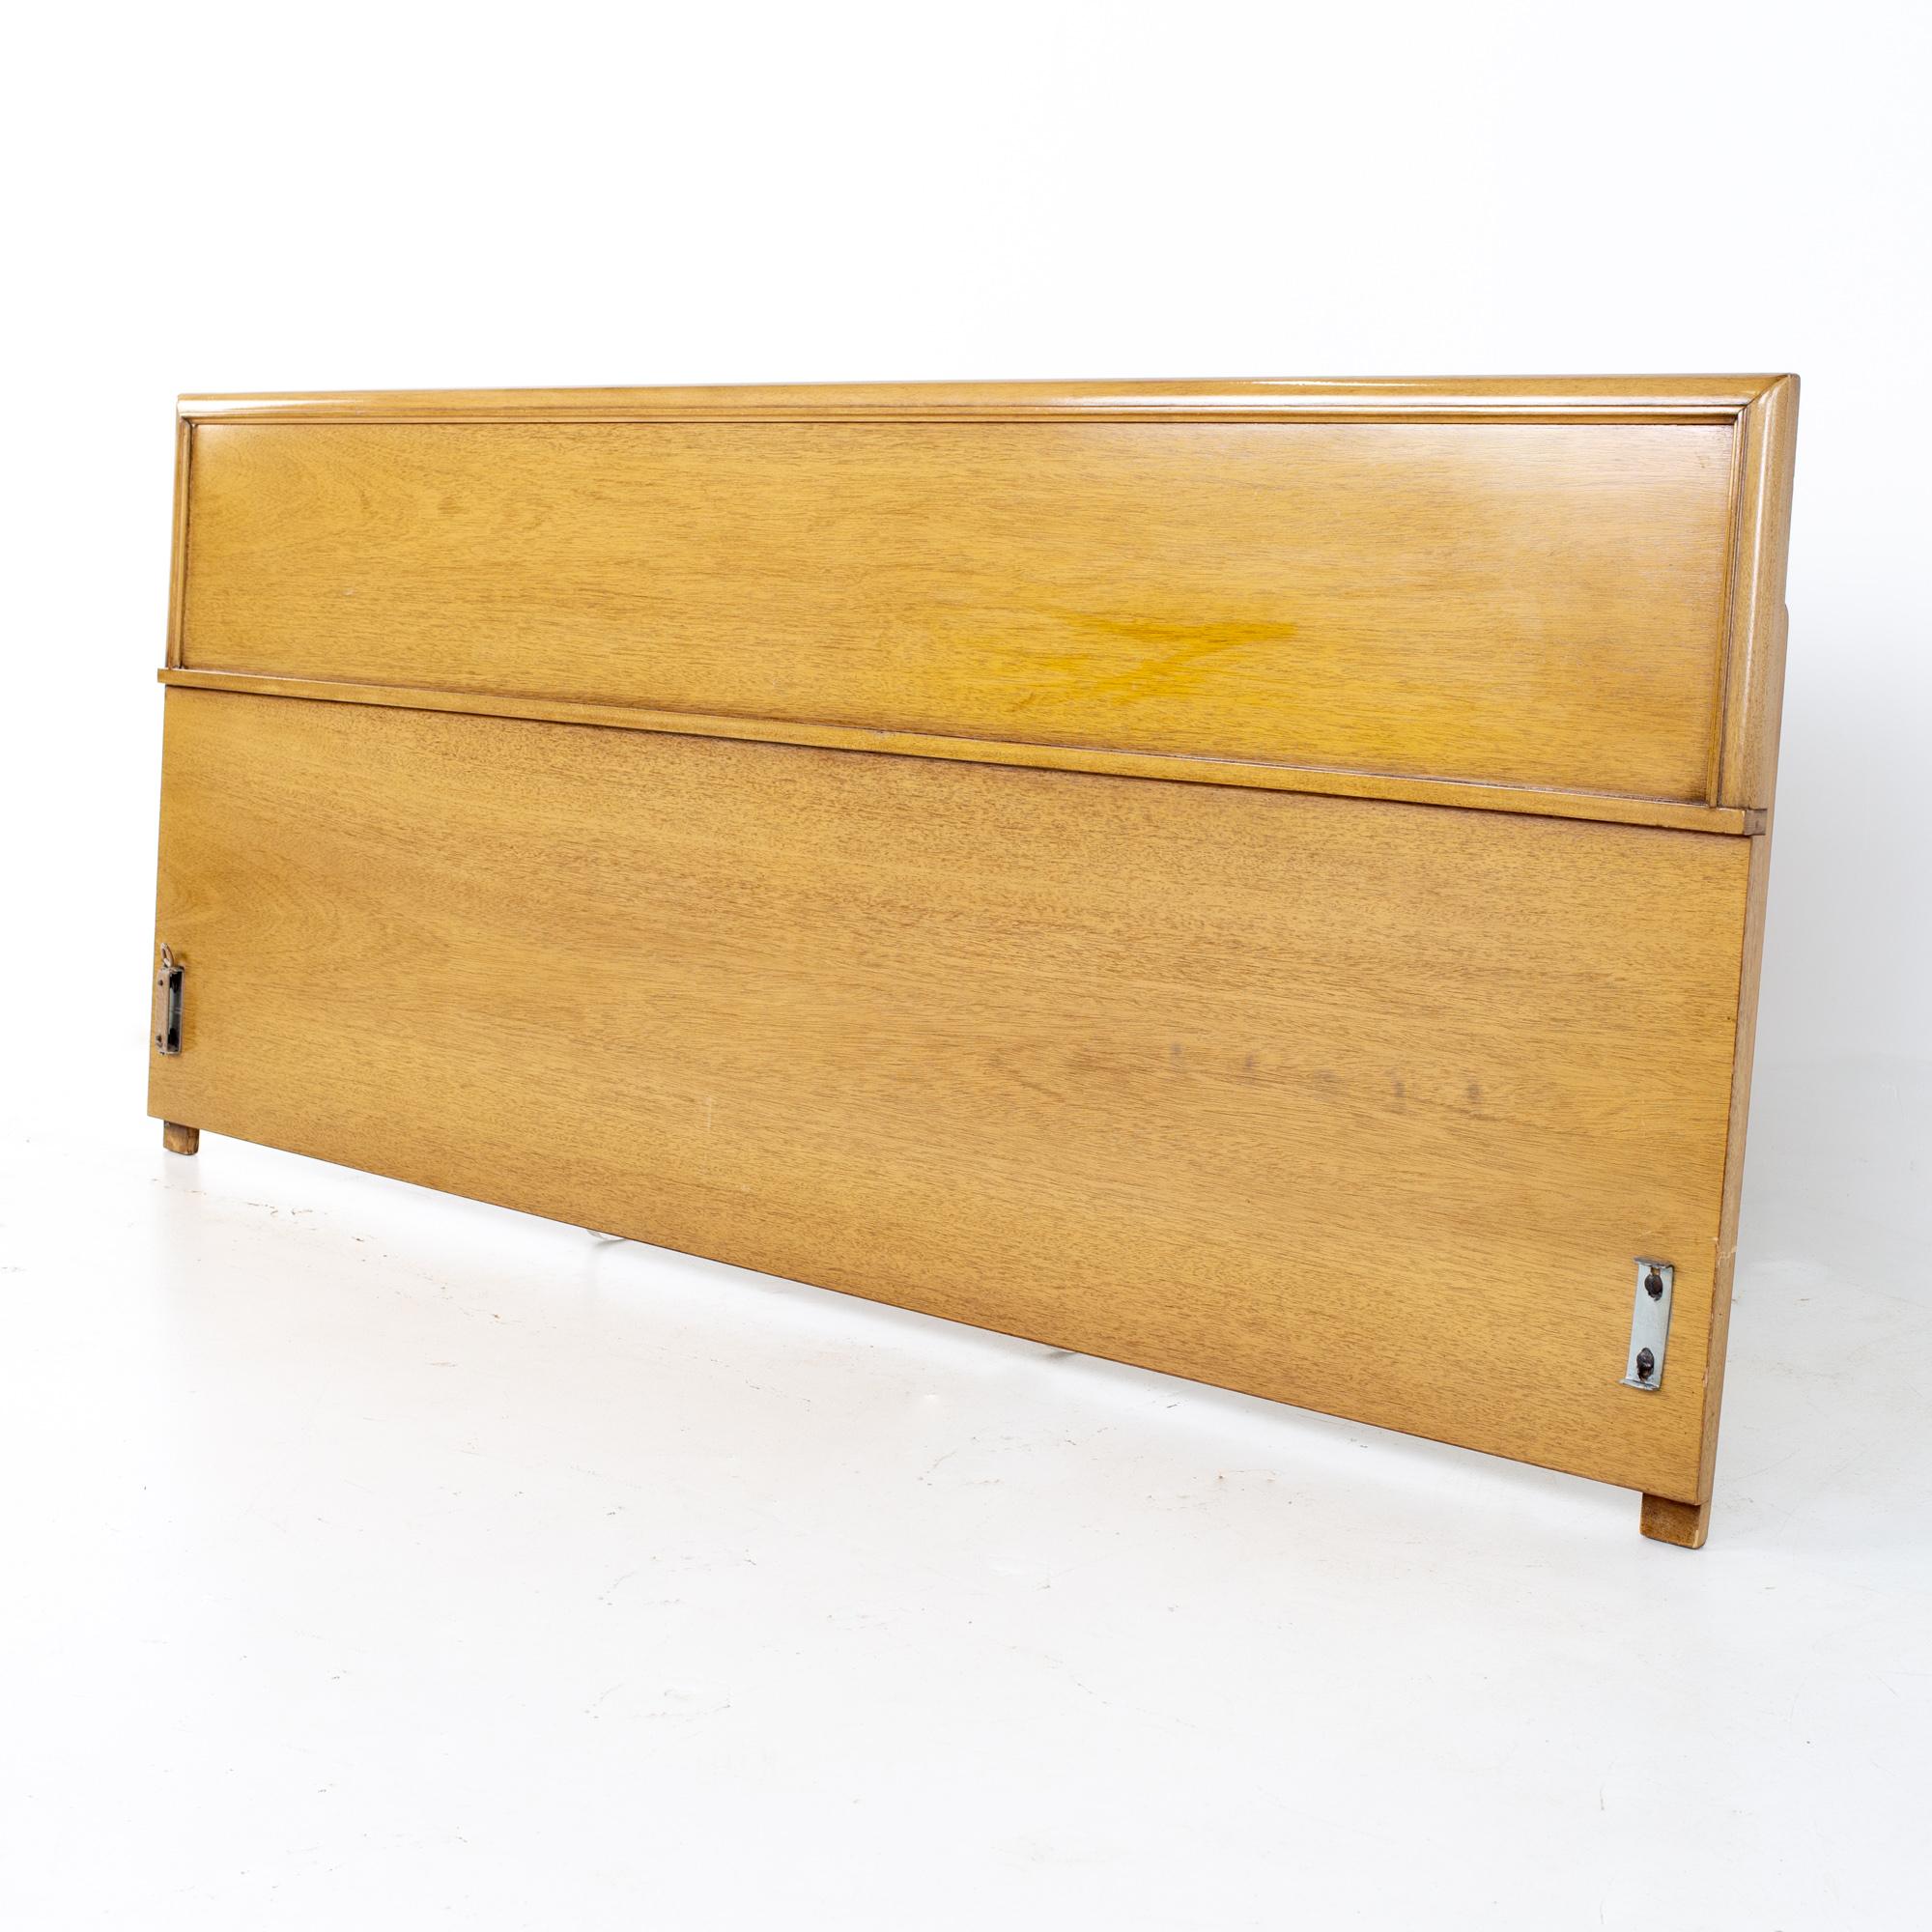 Kent Coffey Continental mid century walnut king headboard.
Headboard measures: 79 wide x 1.25 deep x 34 inches high 

All pieces of furniture can be had in what we call restored vintage condition. That means the piece is restored upon purchase so